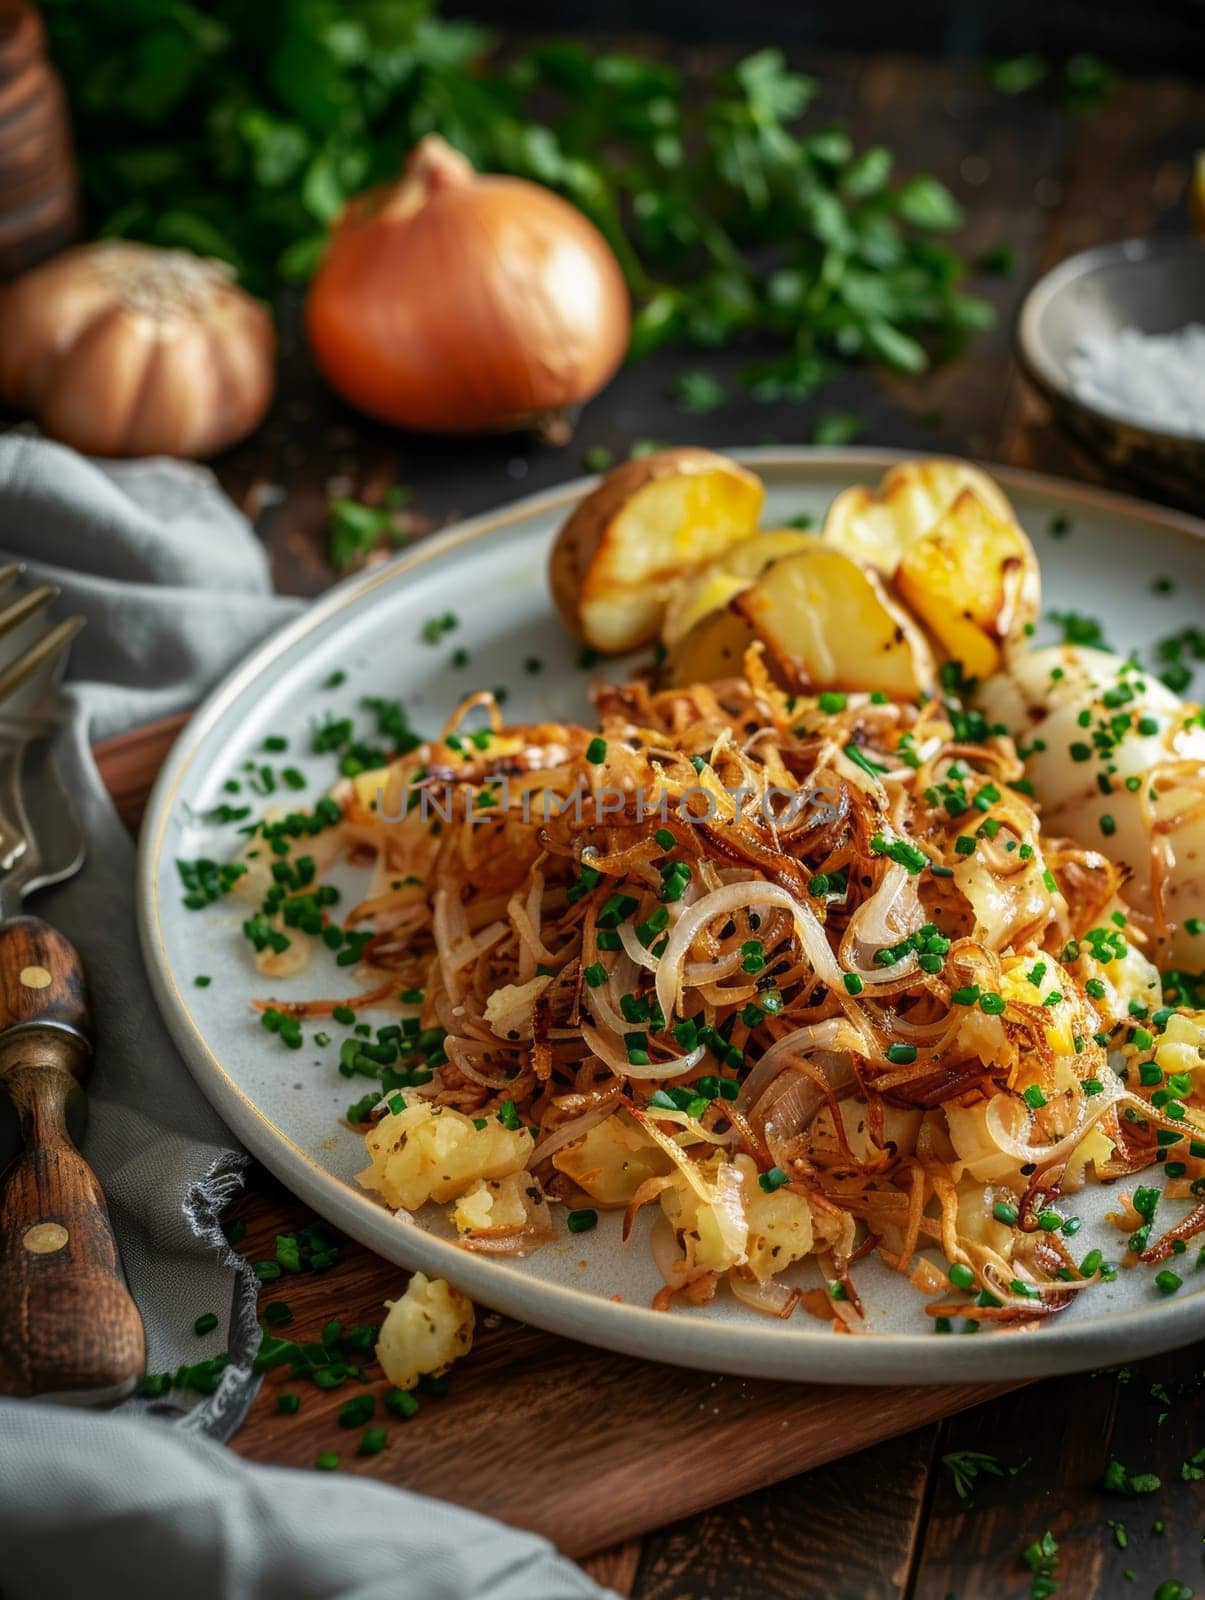 A traditional Portuguese dish of bacalhau a bras, featuring shredded salt cod, sauteed onions, and crispy fried potatoes, presented on a plate for an authentic and mouthwatering culinary display